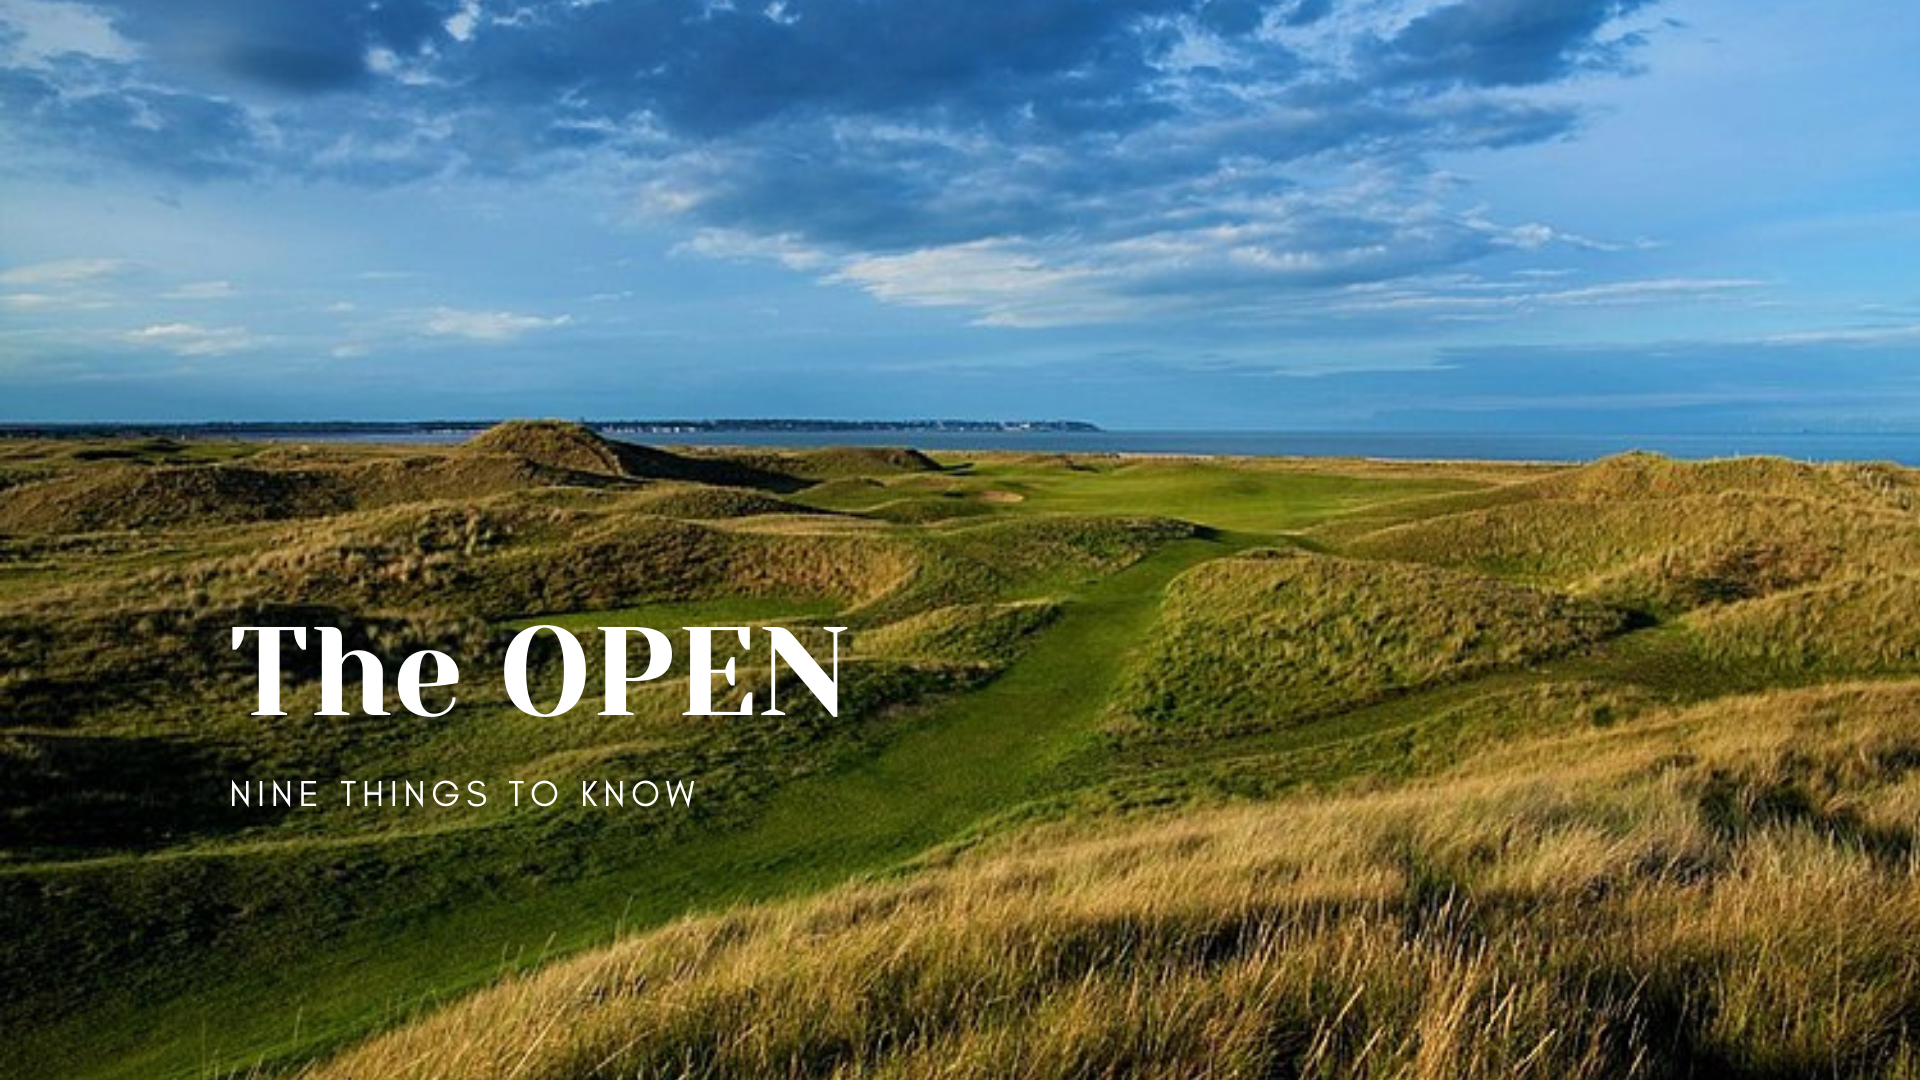 The Open Championship returns to Royal St. George’s